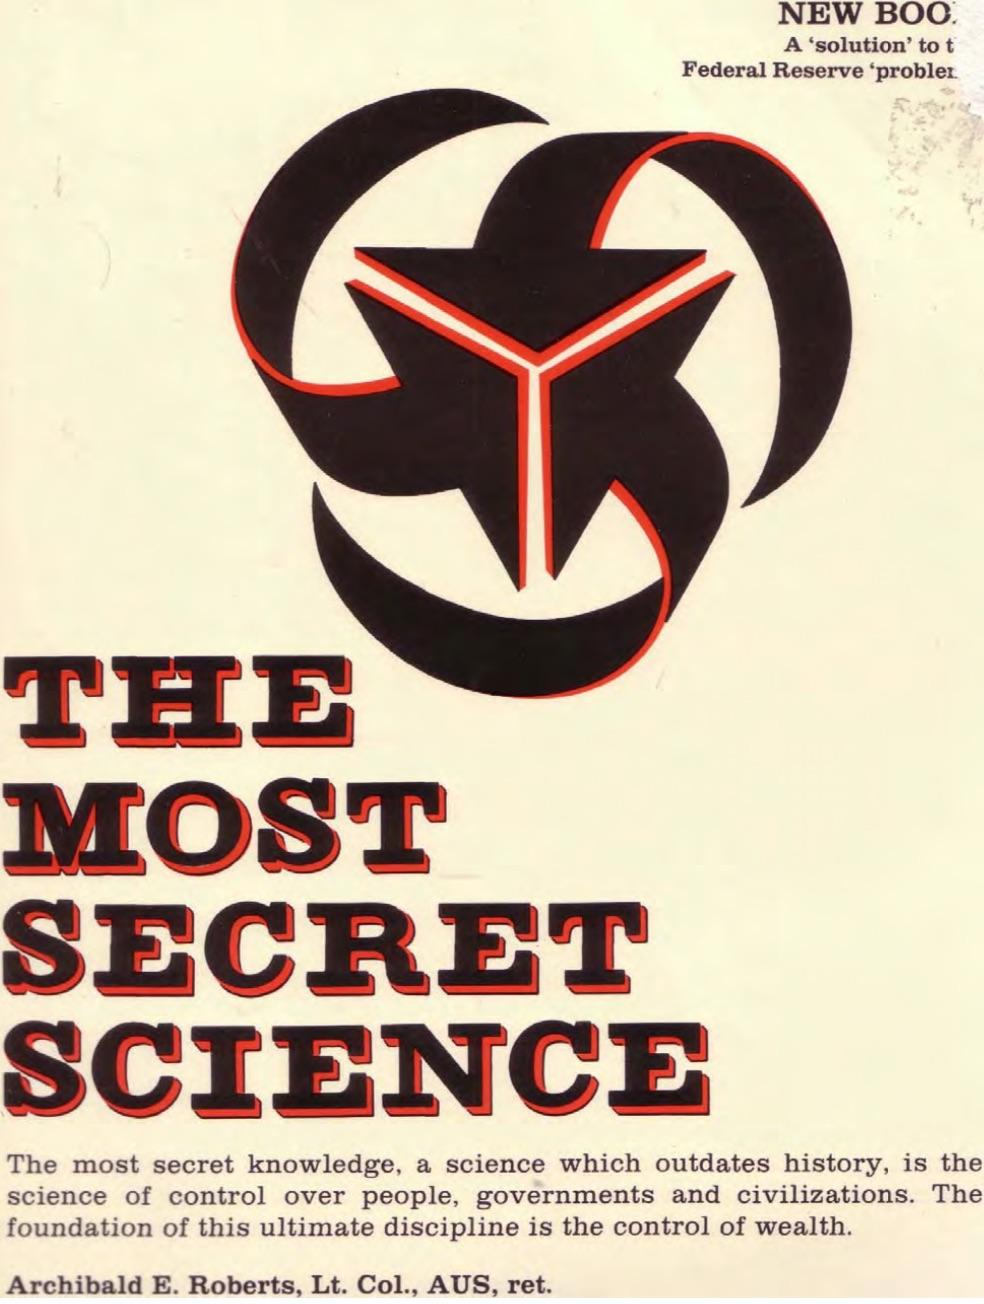 The Most Secret Science (1984) by Archibald Edwards Roberts